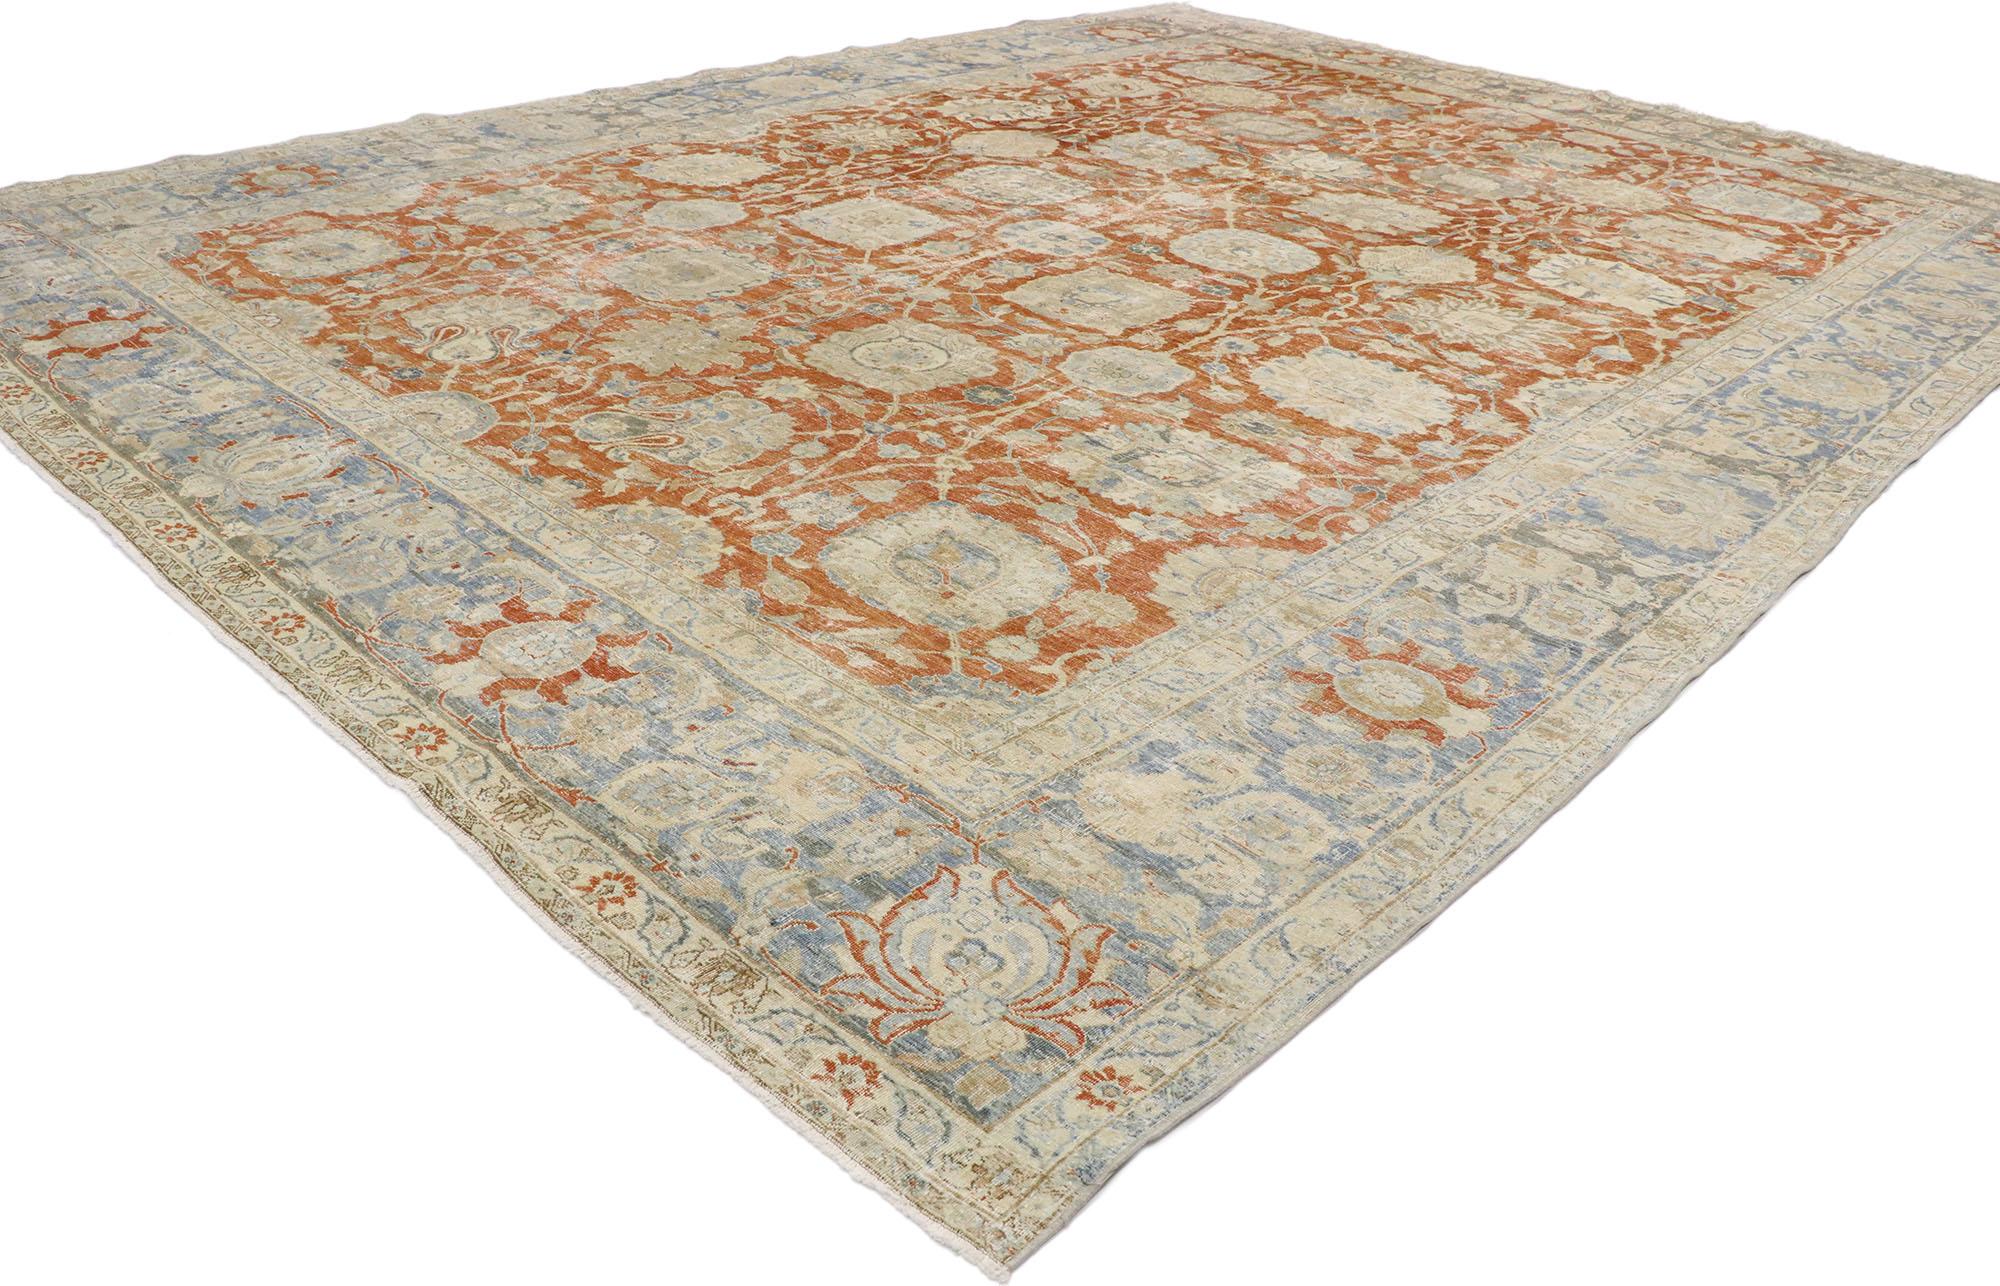 53272, distressed antique Persian Tabriz rug with Rustic Colonial style. With ornate details and a lovingly time-worn composition, this hand knotted wool distressed antique Persian Tabriz rug is poised to impress. The weathered field is covered in